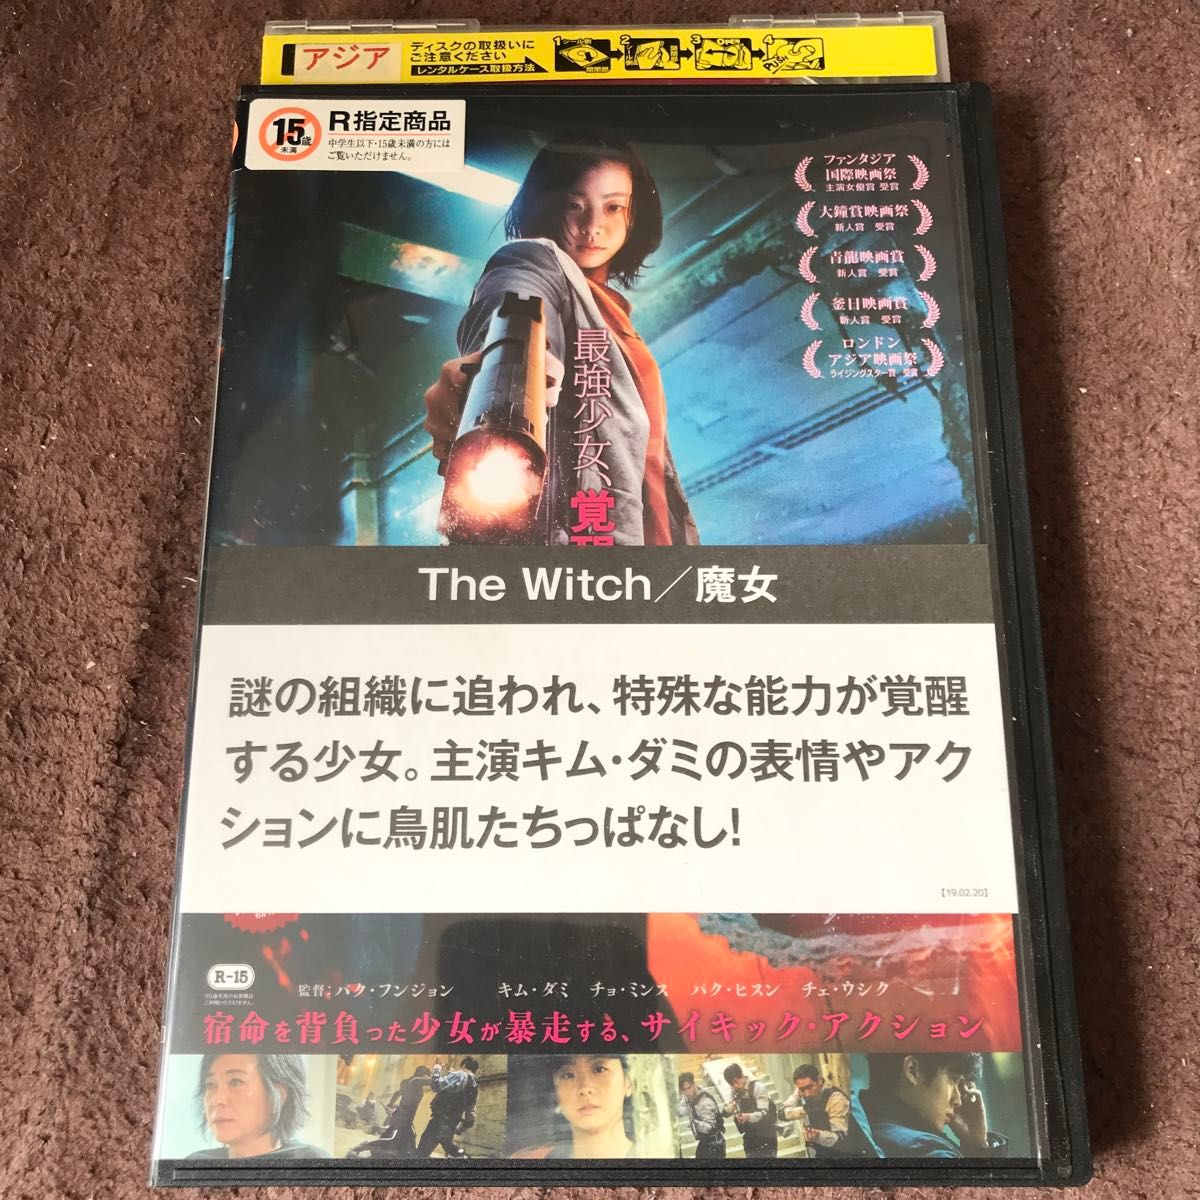 [DVD洋] THE WITCH 魔女 キムダミ 洋画 DVD 